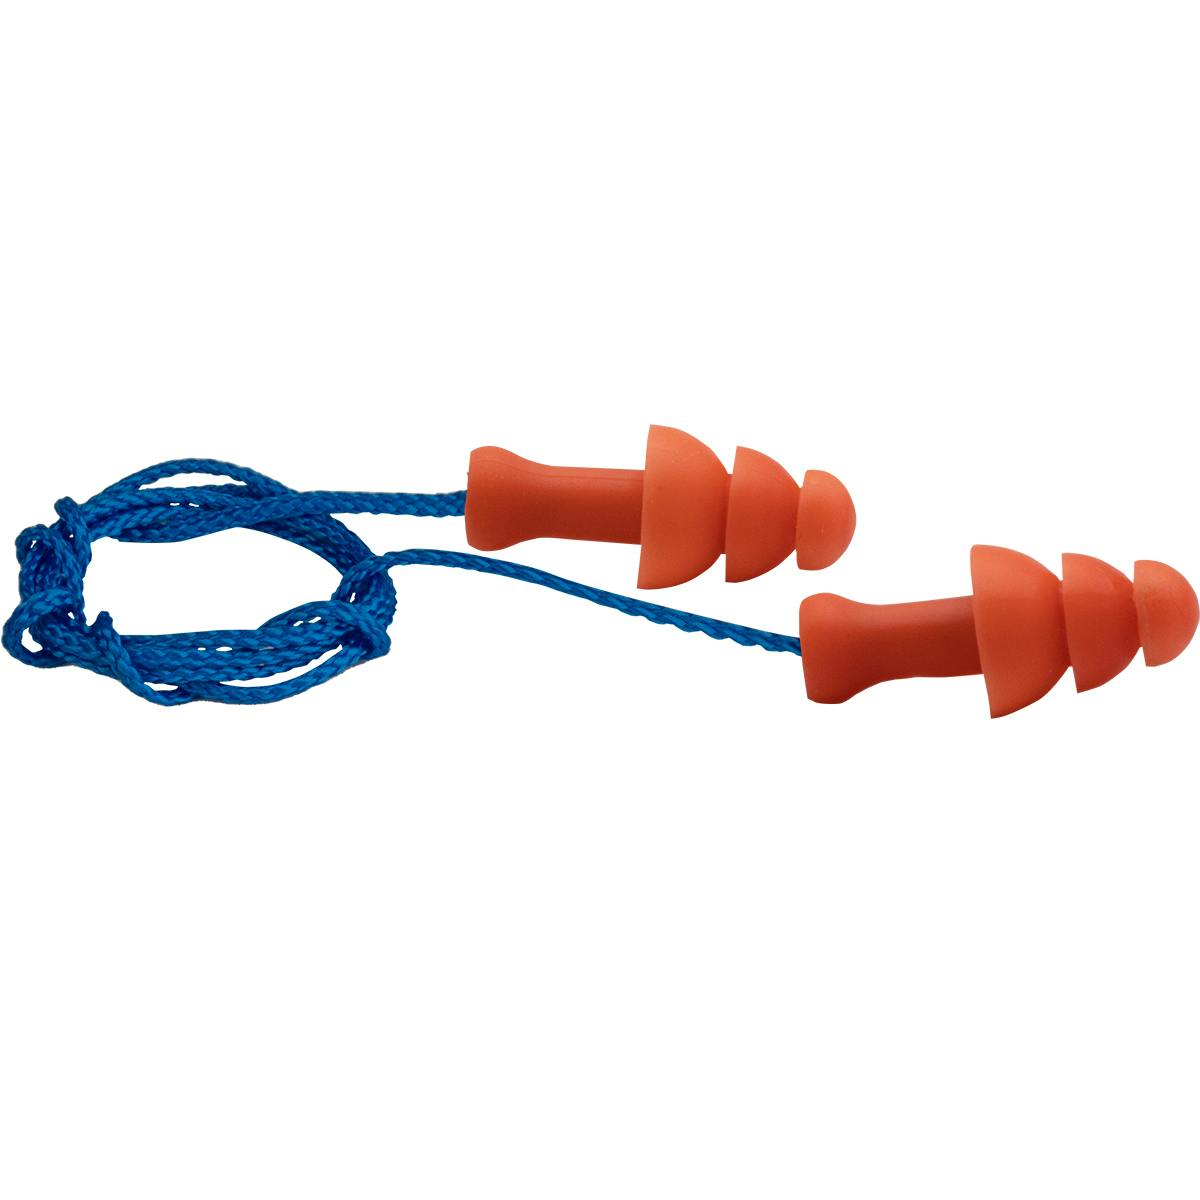 Small Reusable TPR Corded Ear Plugs - NRR 25, Orange (267-HPR330C) - S